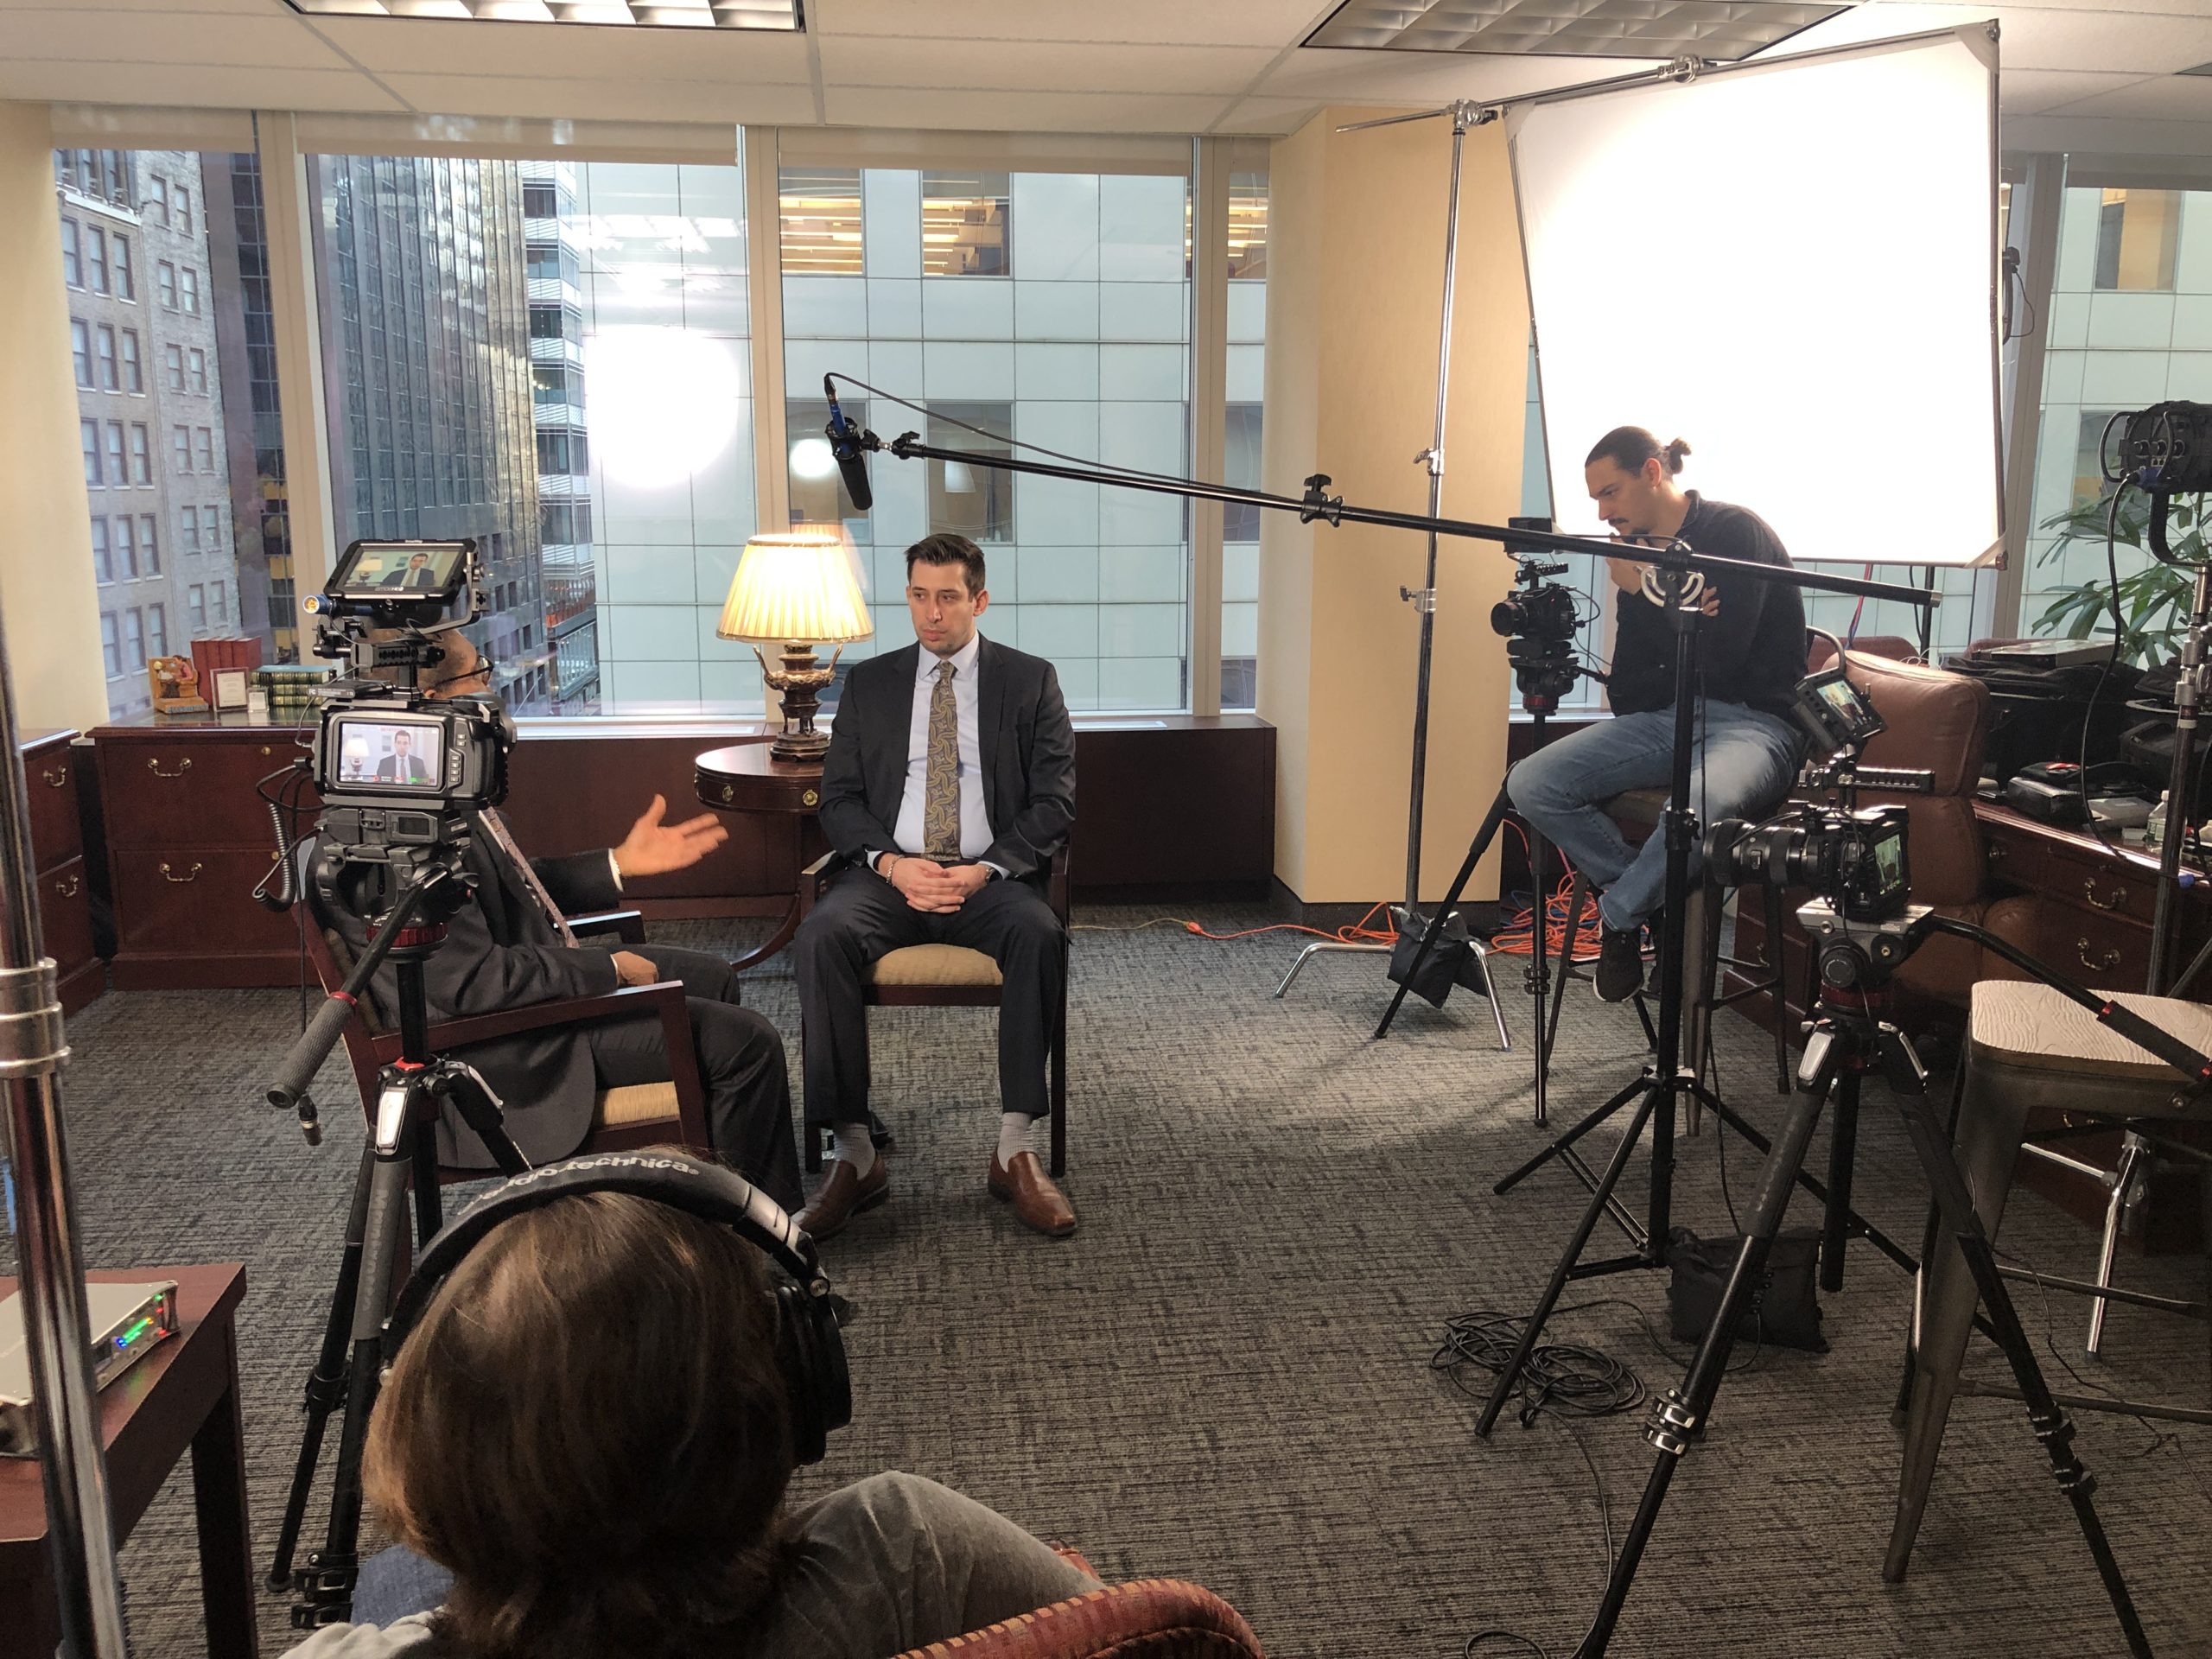 What to Keep In Mind When Creating a Corporate Marketing Video